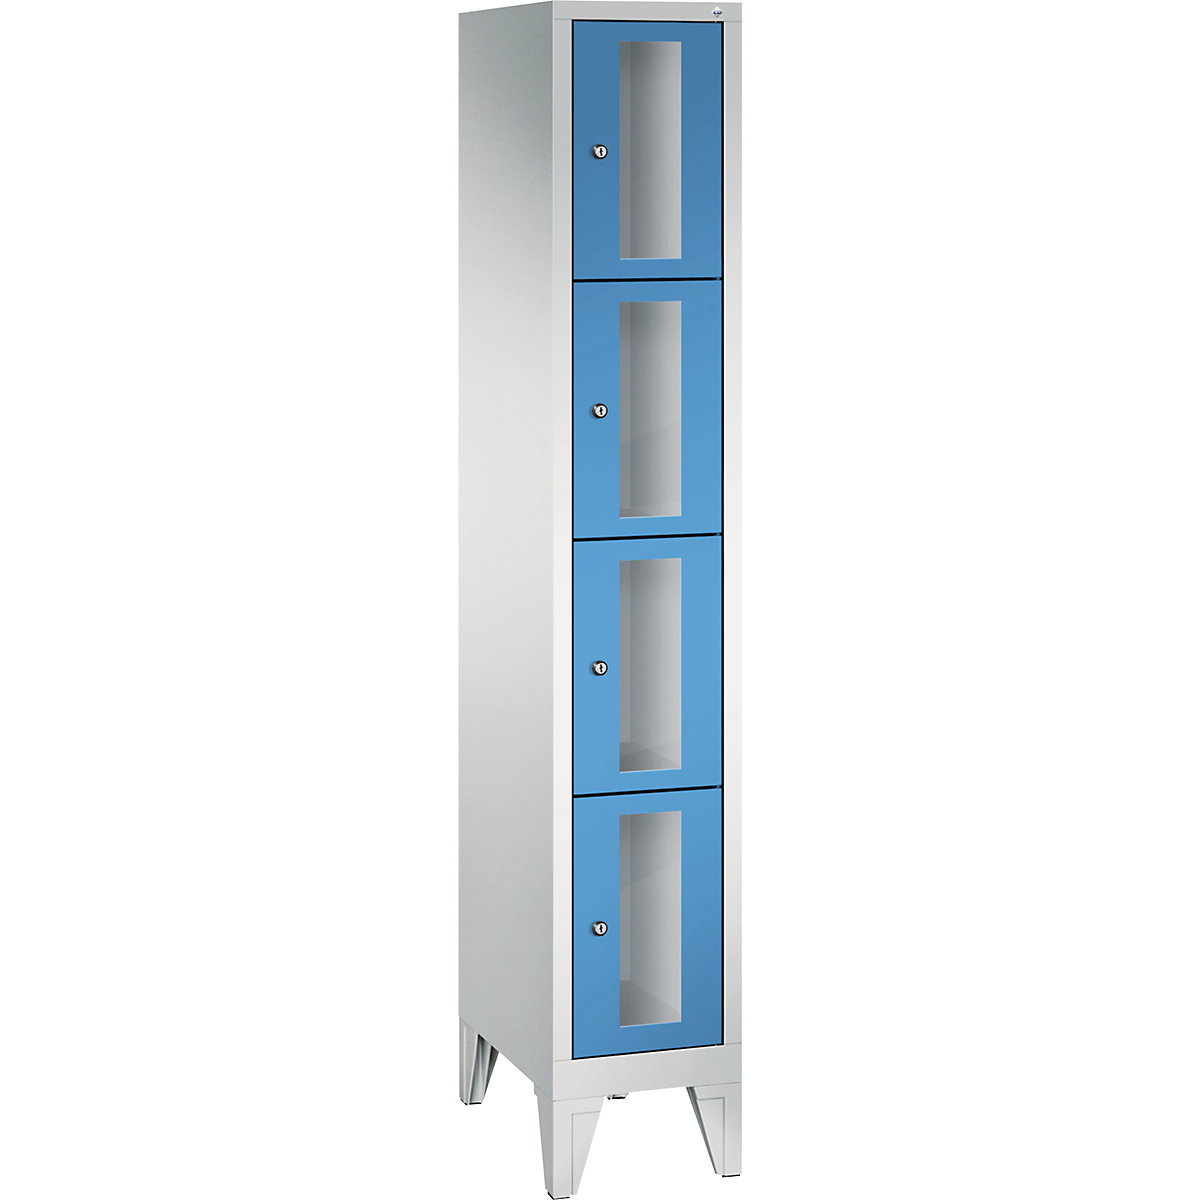 CLASSIC locker unit, compartment height 375 mm, with feet – C+P, 4 compartments, width 320 mm, light blue door